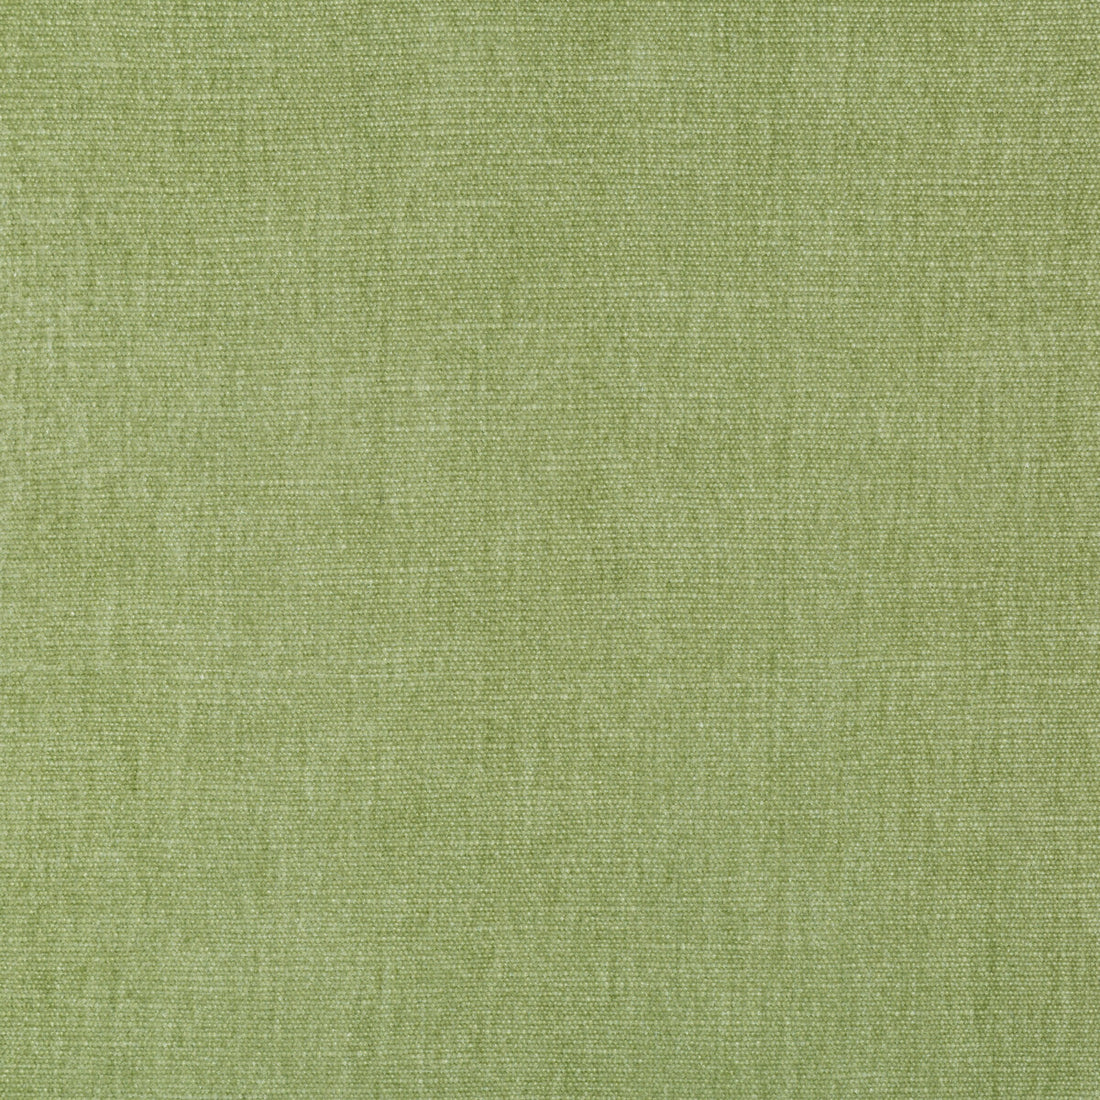 Kravet Smart fabric in 36076-23 color - pattern 36076.23.0 - by Kravet Smart in the Sumptuous Chenille II collection